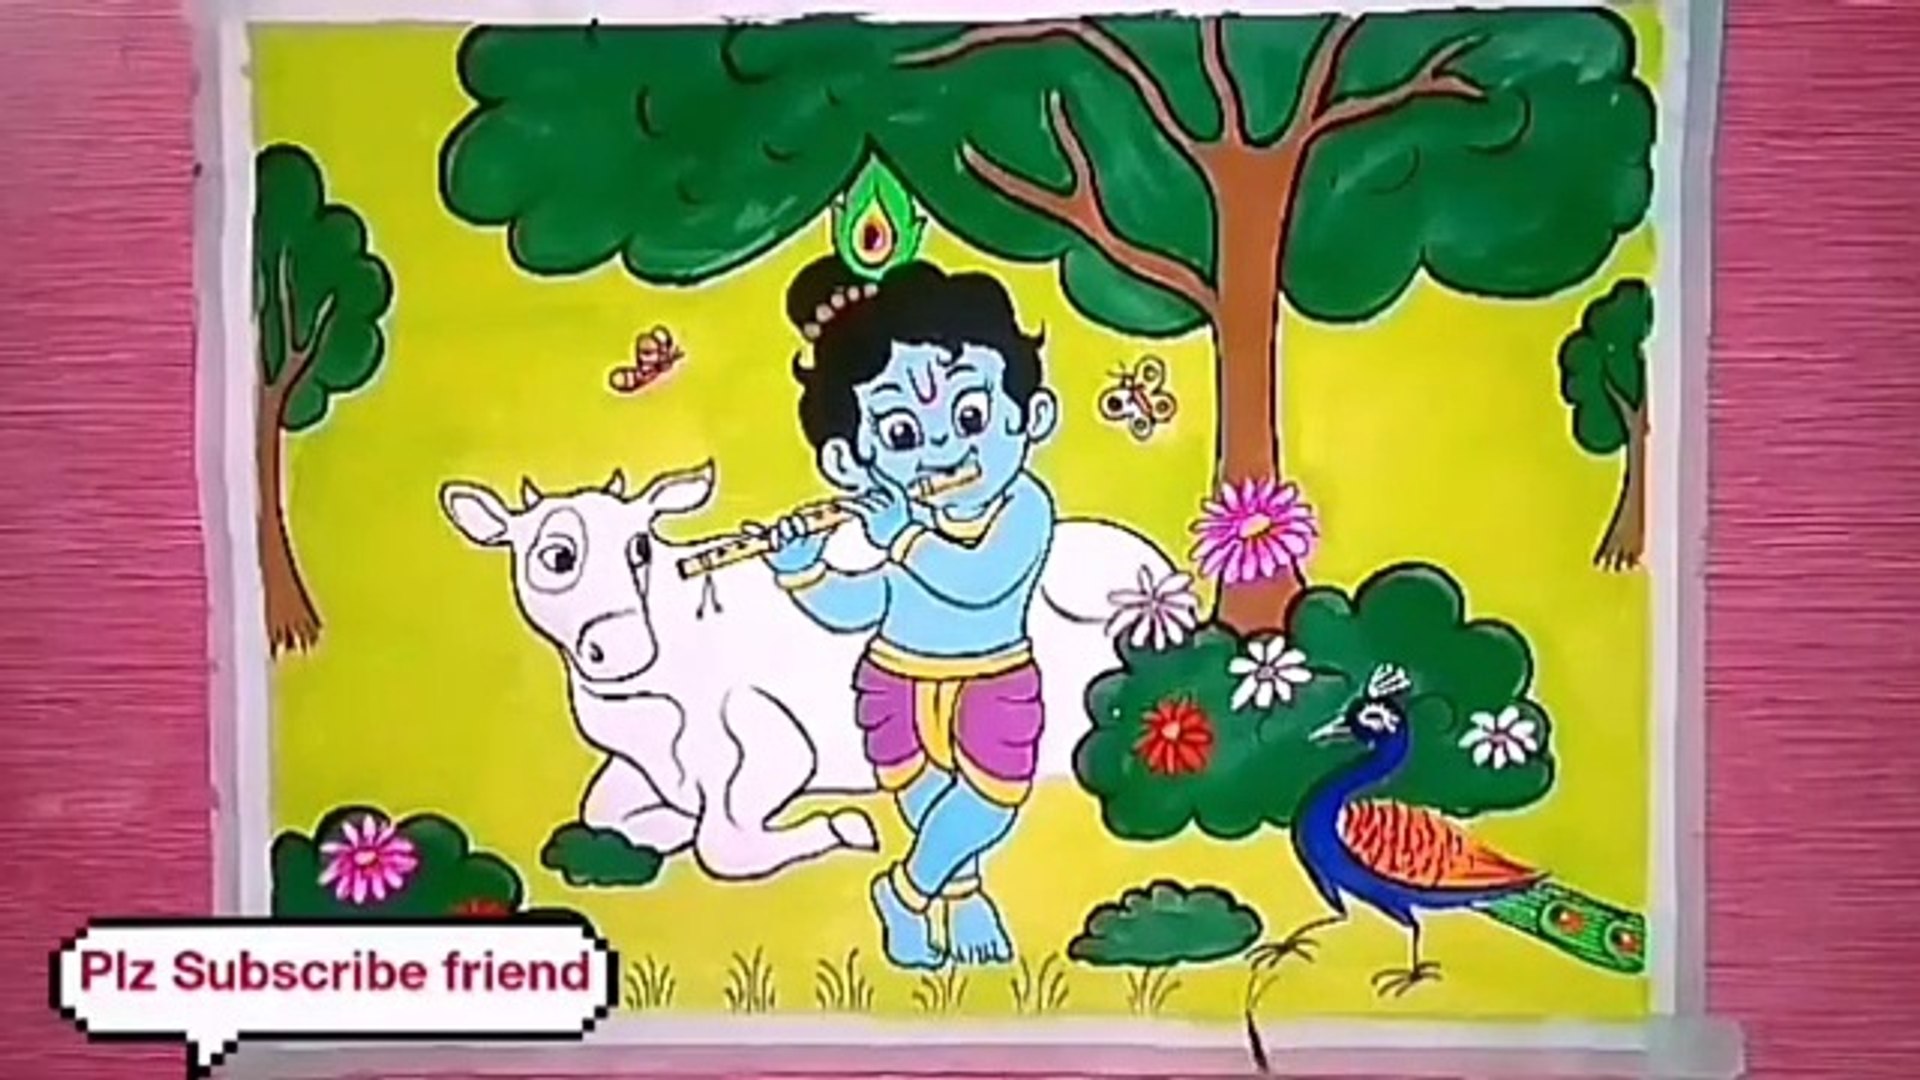 श्री कृष्ण जी का चित्र केसे बनाया जाता है|little krishna drawing for kids  |how to draw little krishna with cow/ - video Dailymotion